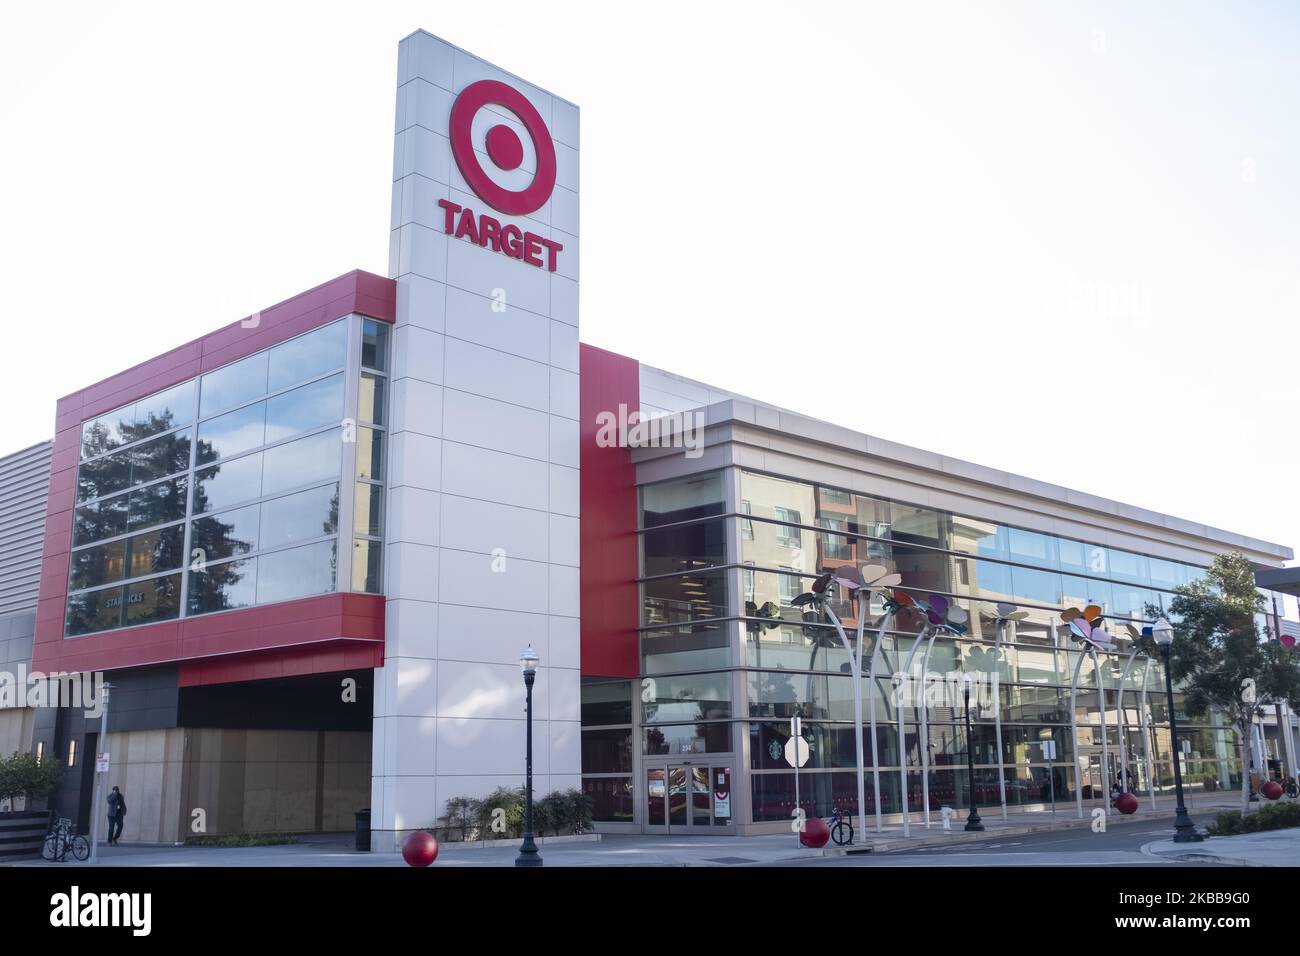 A Target logo is seen at a store in Sunnyvale, California, United States on Wednesday, November 20, 2019. Thanksgiving and Christmas holiday shopping season has begun in the U.S. Target Corporation to Webcast 3rd quarter earnings conference call on Wednesday, November 20, 2019. (Photo by Yichuan Cao/NurPhoto) Stock Photo